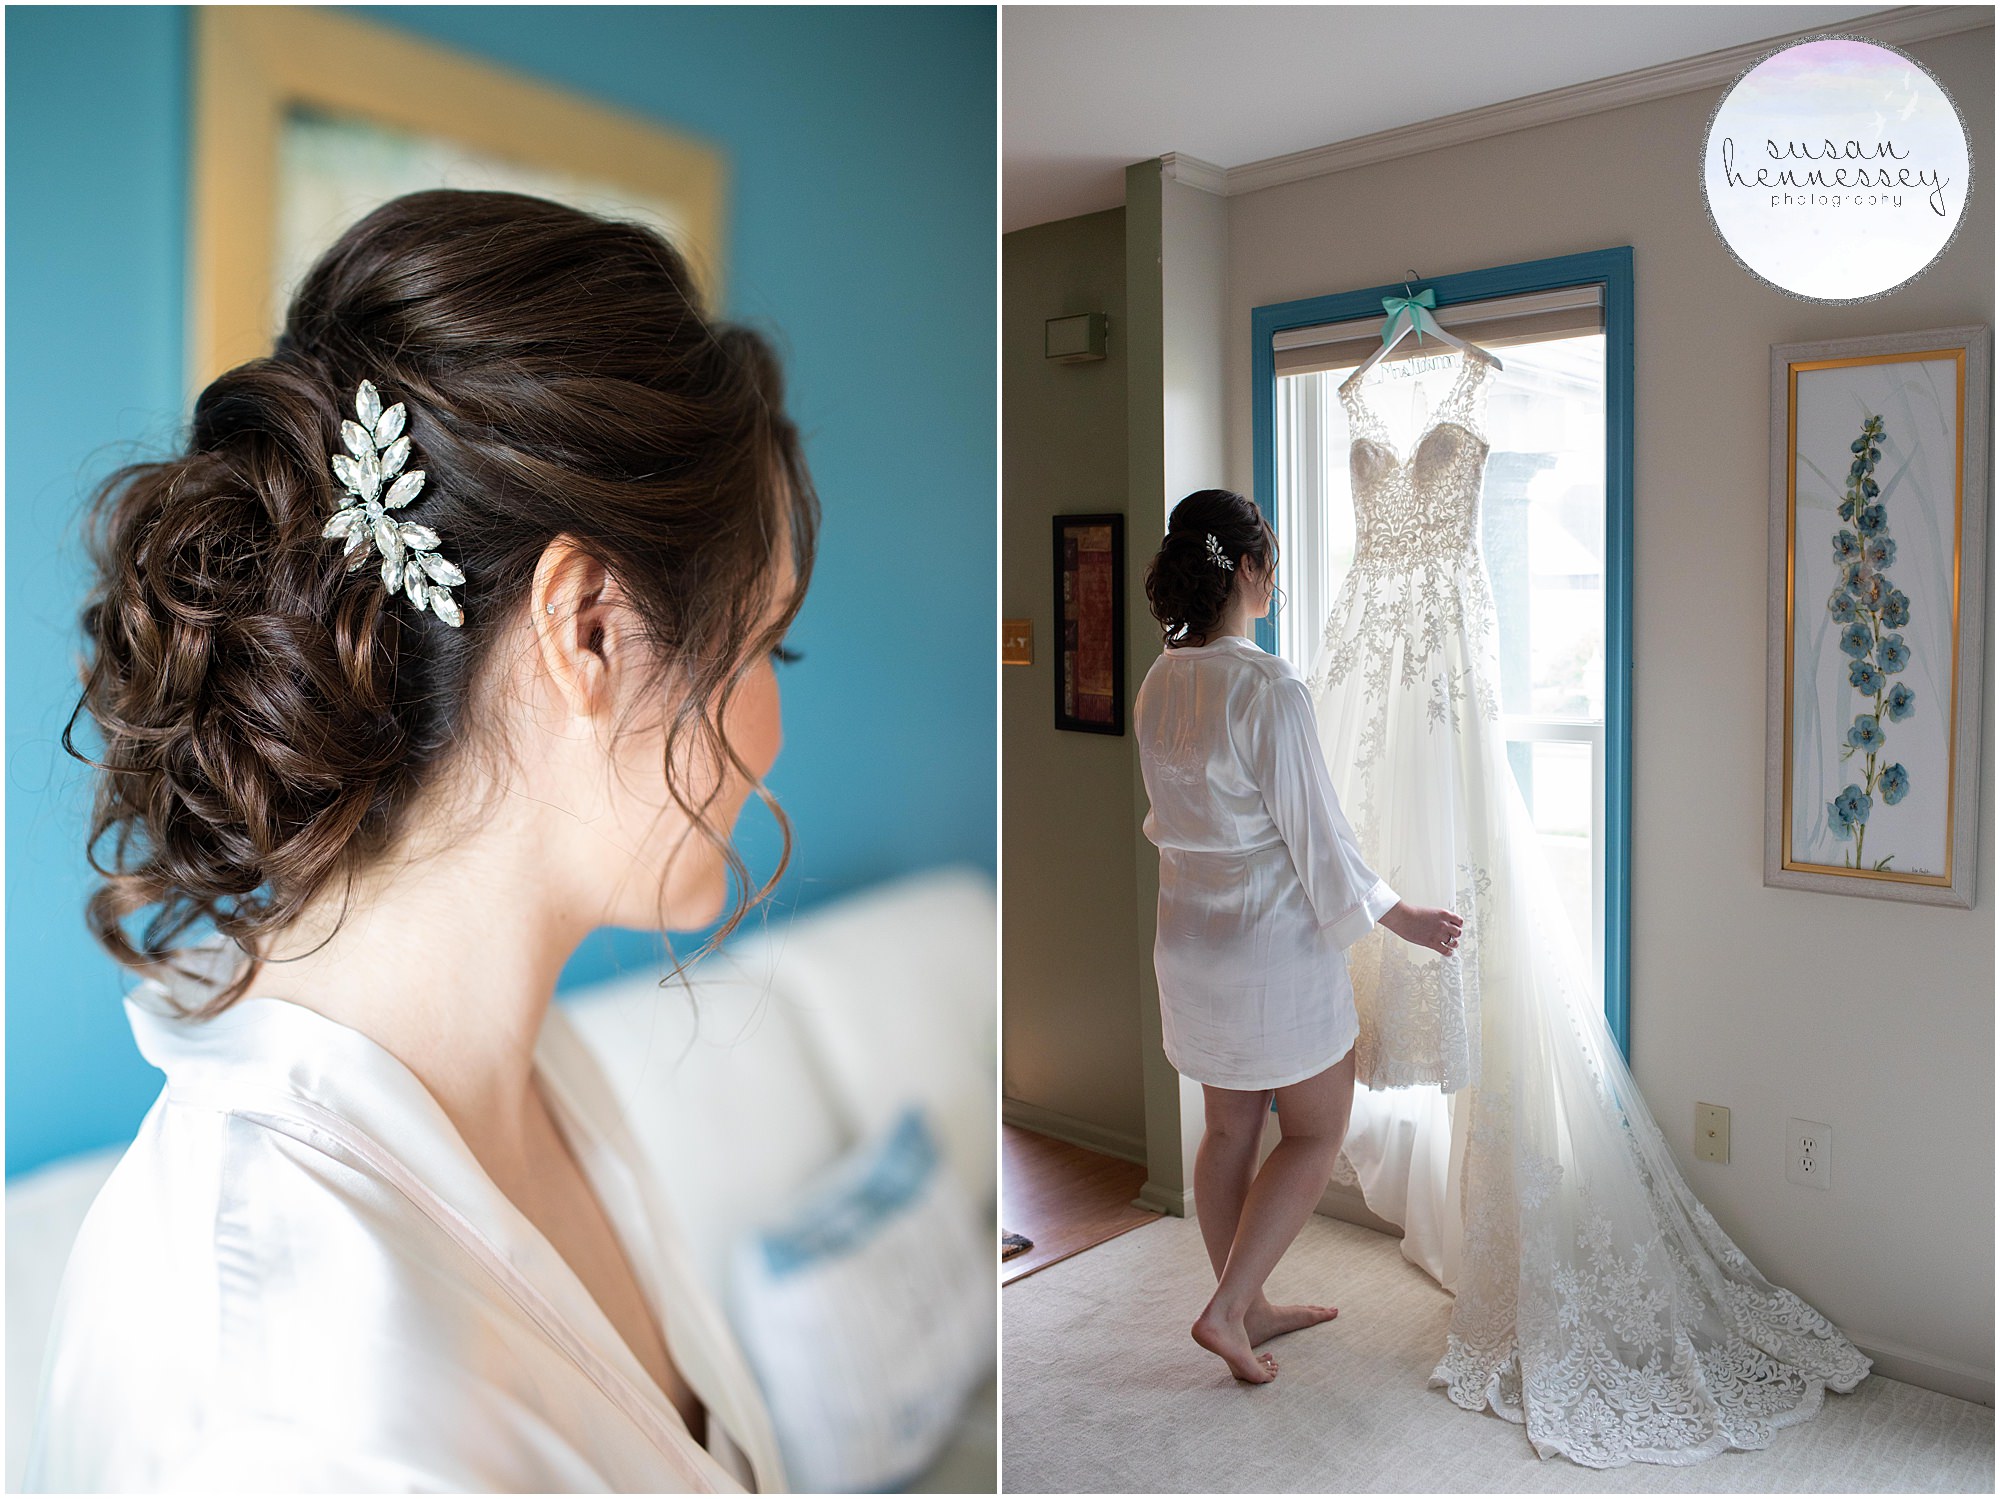 A detail photo of a bride's hair piece and her wedding dress hanging in the window.